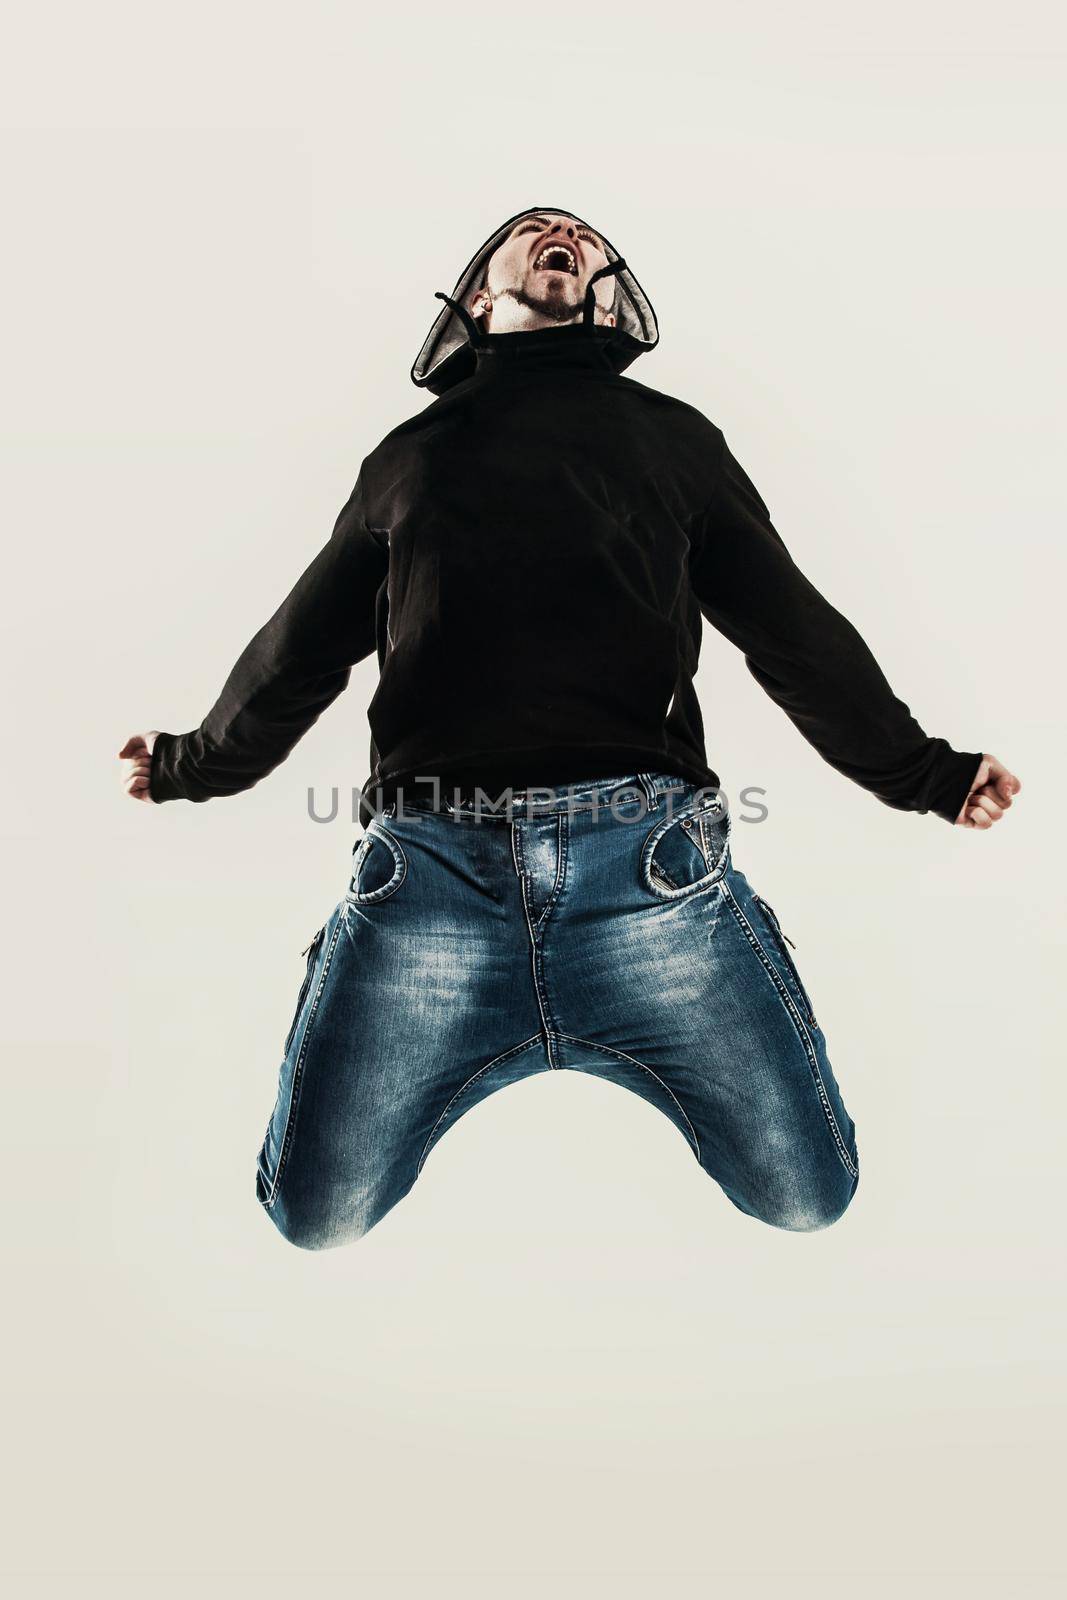 rapper dancing break dance .photo on a light background. the pho by SmartPhotoLab